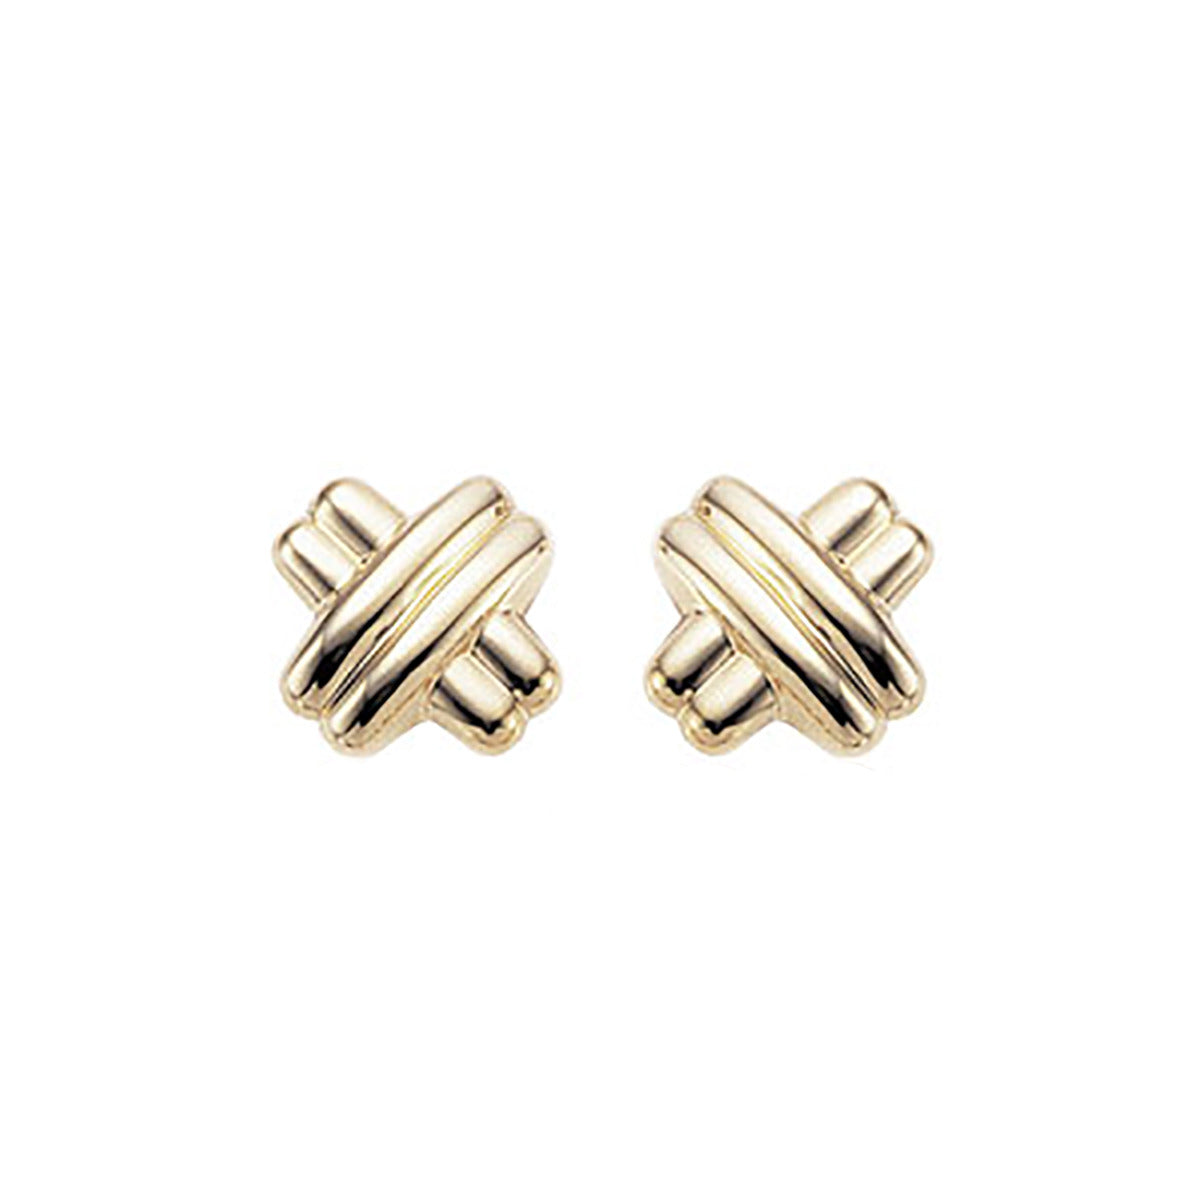 14K Yellow Gold Classic Ball Stud Earrings with Screwbacks (Unisex) 7mm